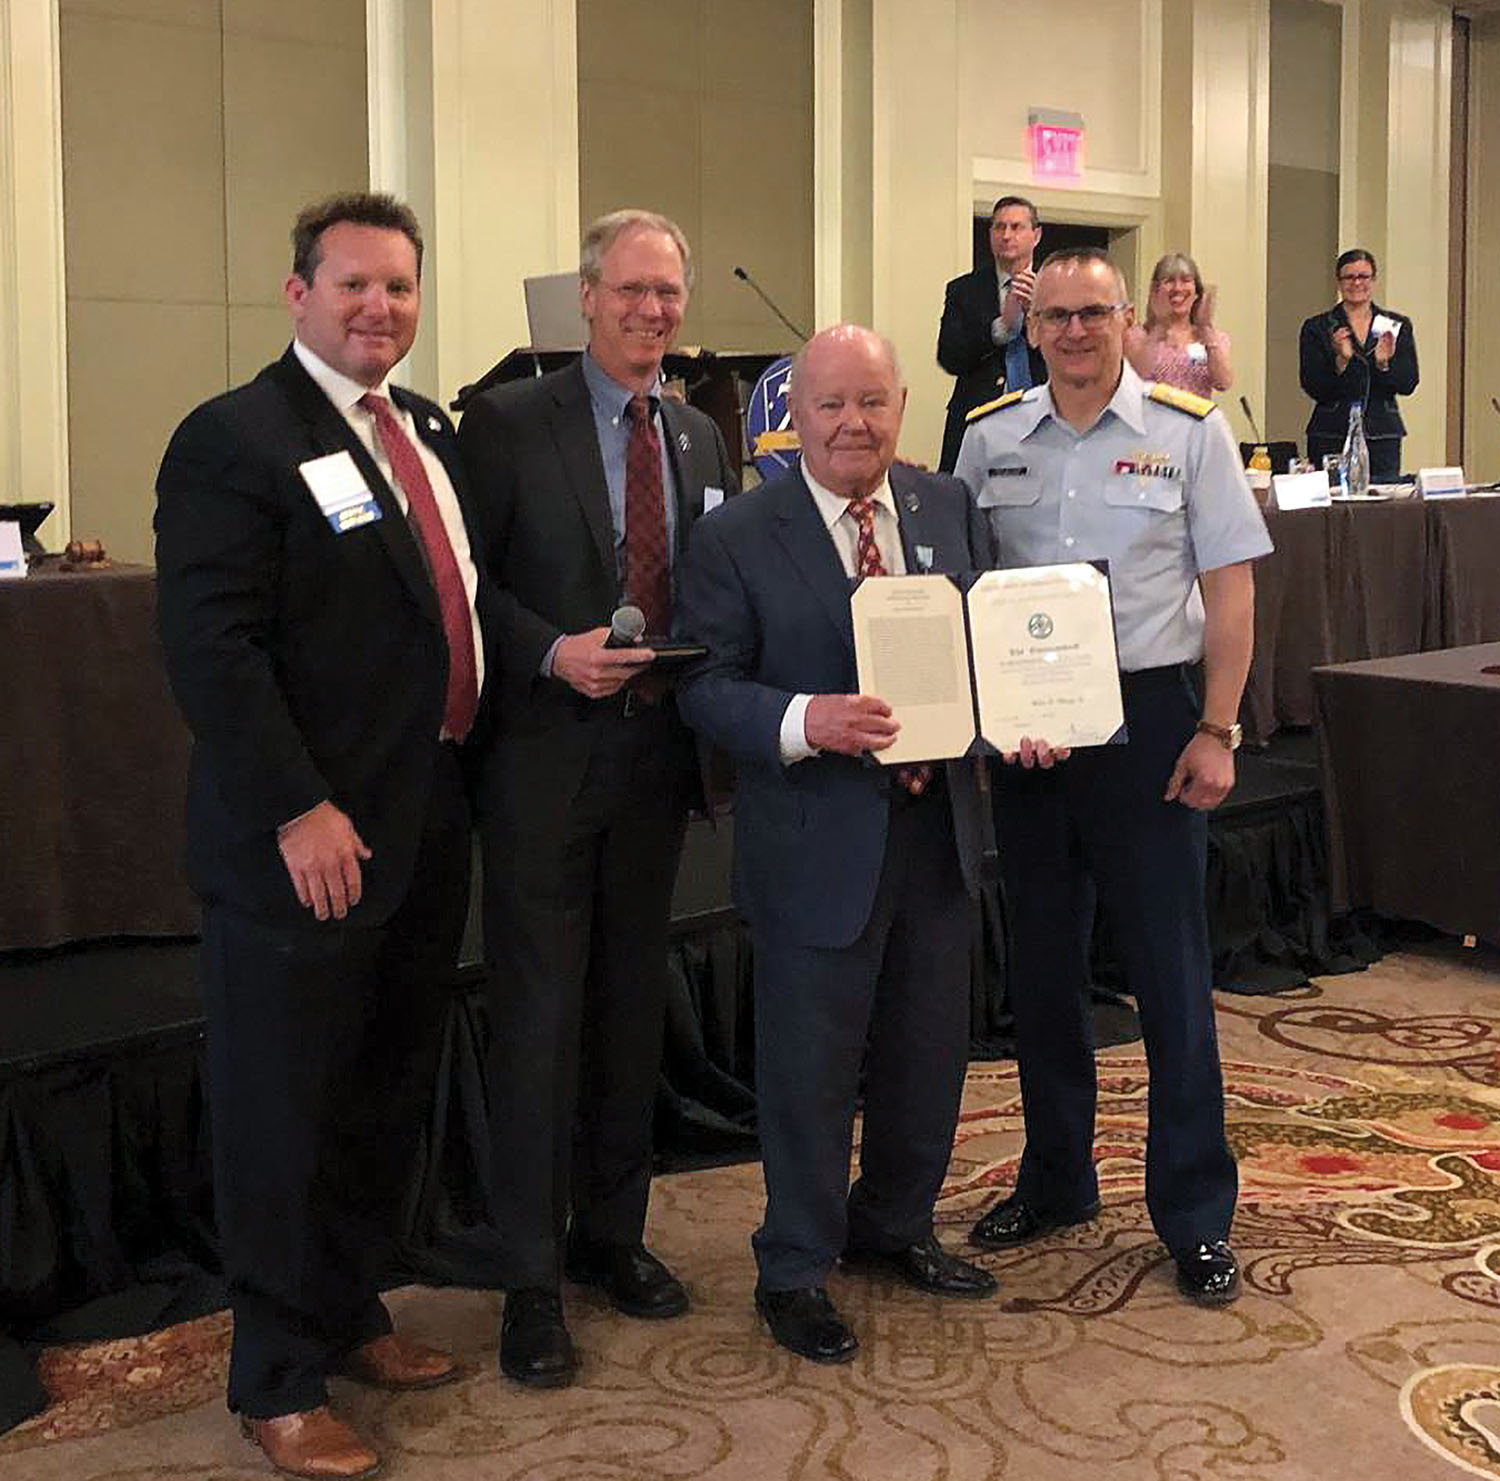 From left, Clark Todd, Blessey Marine Services president and chief operating officer; Scott Merritt, American Waterways Operators chairman; Walter Blessey Jr.; and Rear Adm. John Nadeau, Coast Guard assistant commandant for prevention policy.